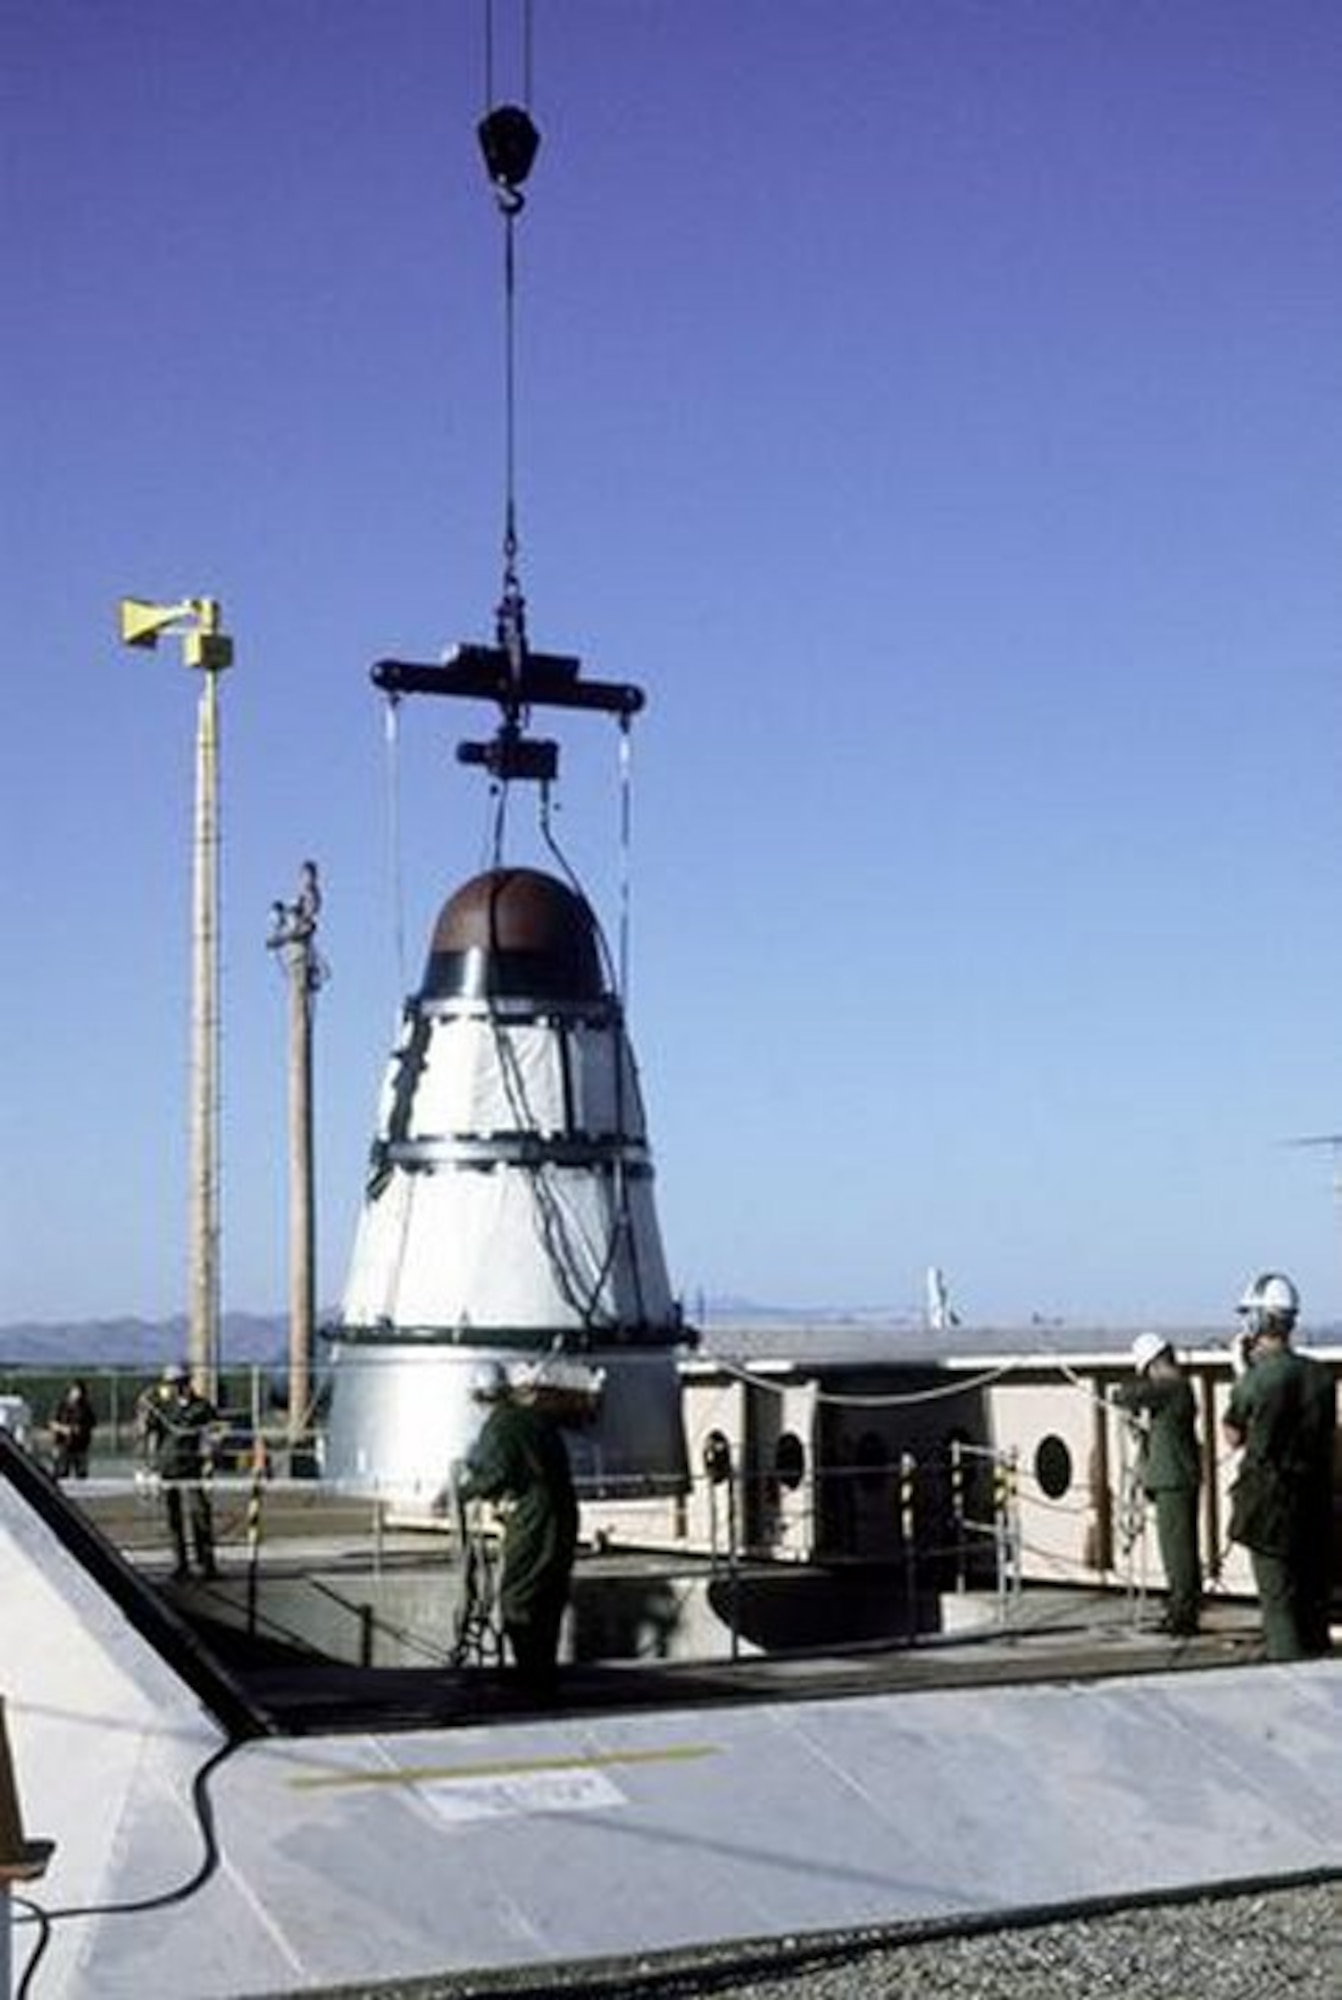 After 24-years of uninterrupted strategic alert, the 308th Strategic Missile Wing at Little Rock Air Force Base ended its around-the-clock-dedicated service.  May 5, 1987, crews ended the 24-hour-vigilant watch and prepared to deactivate the U.S. Air Force’s last Titan II missile silo. Approximately 50 days after ending its alert status, personnel began the deactivation process of Site 373-8, located one mile northwest of Judsonia. Crews started the site decommissioning with the removal of the intercontinental ballistic missile followed by purging the missile complex of underground plumbing, shutting down environmental systems, and dismantling the site.  After a quarter century, the Titan II ended its wartime mission of defending America.